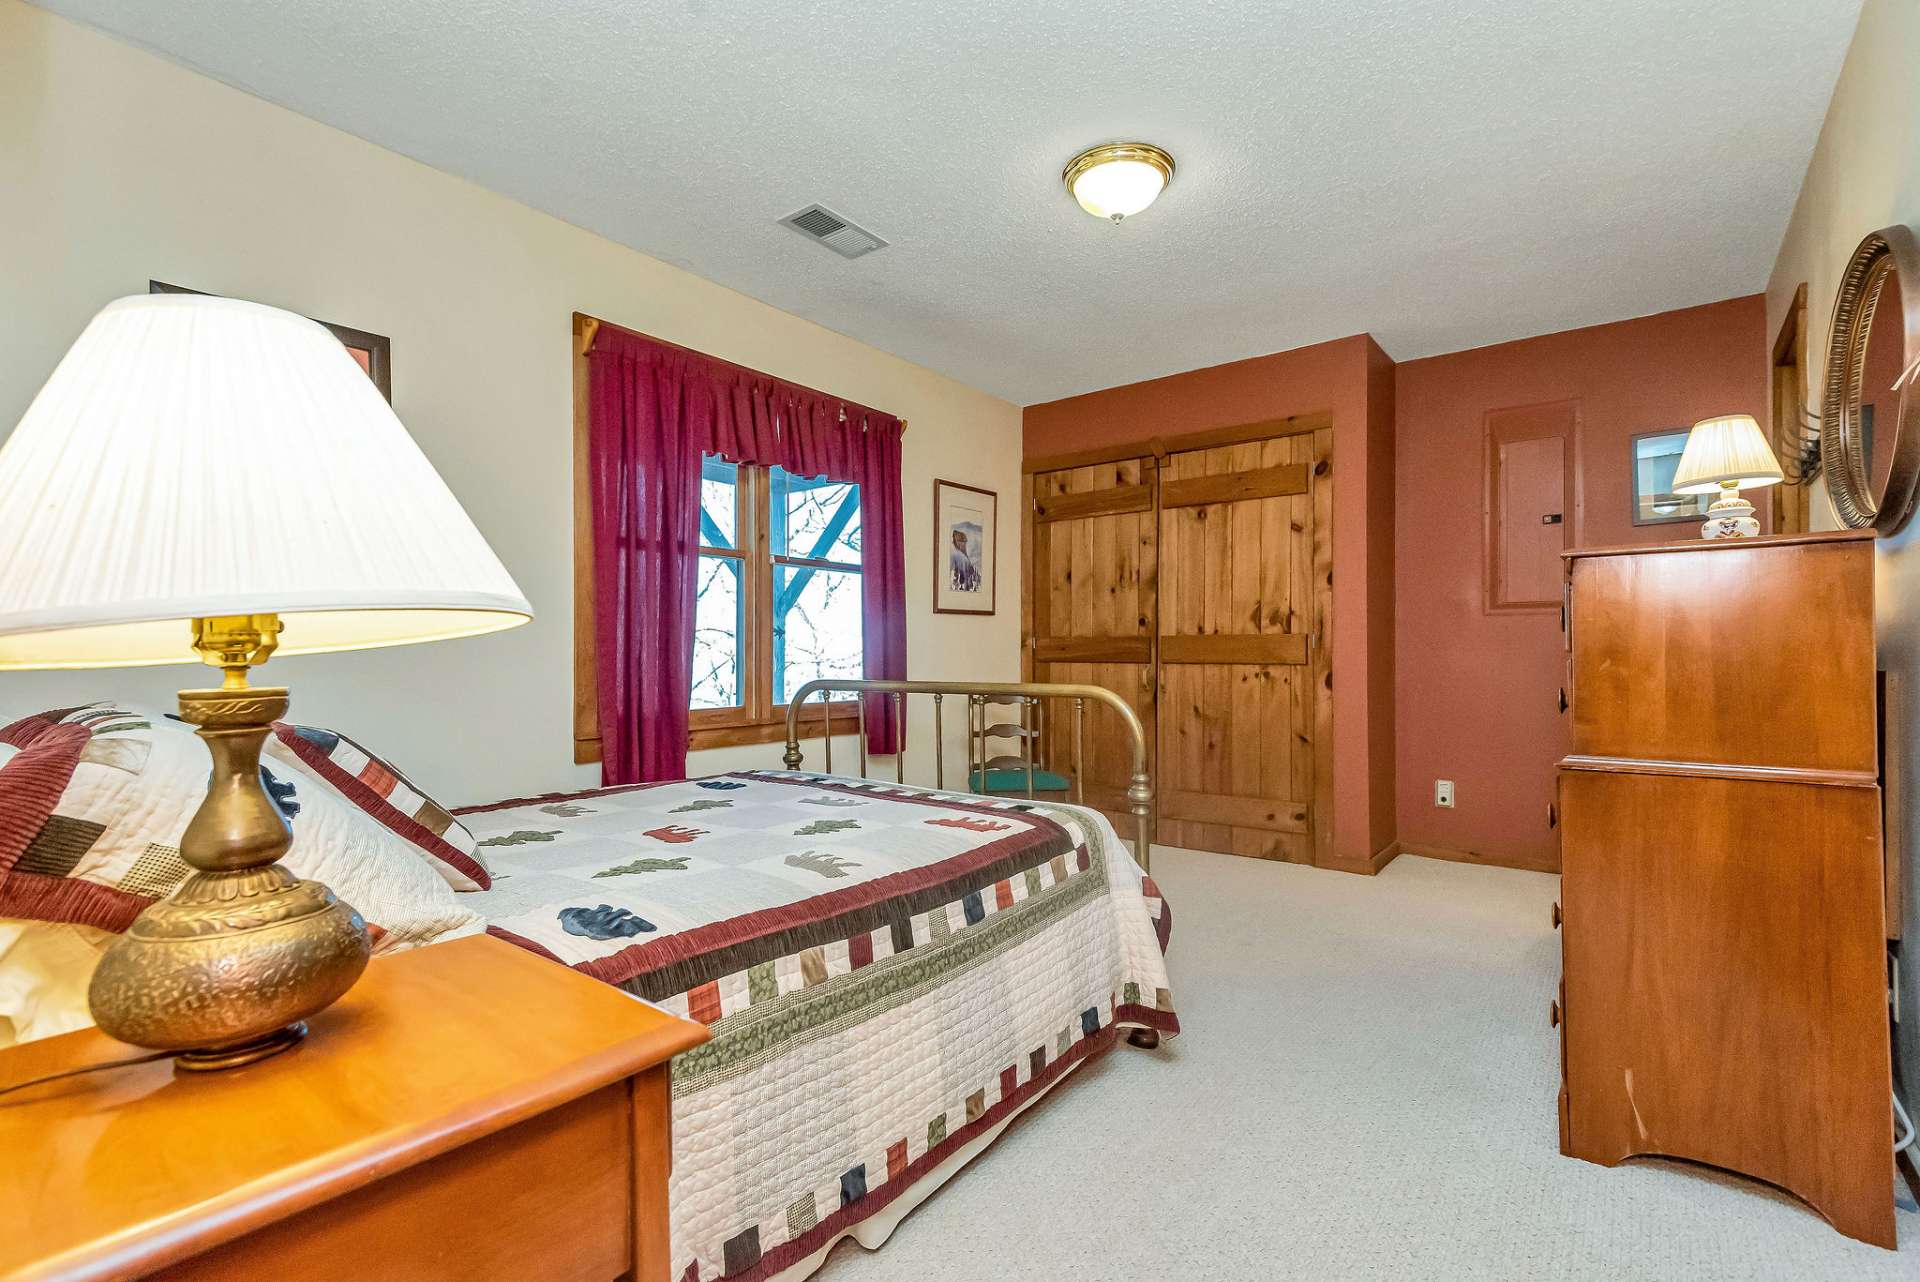 The lower-level guest bedroom offers comfort & convenience for guests or family members alike.